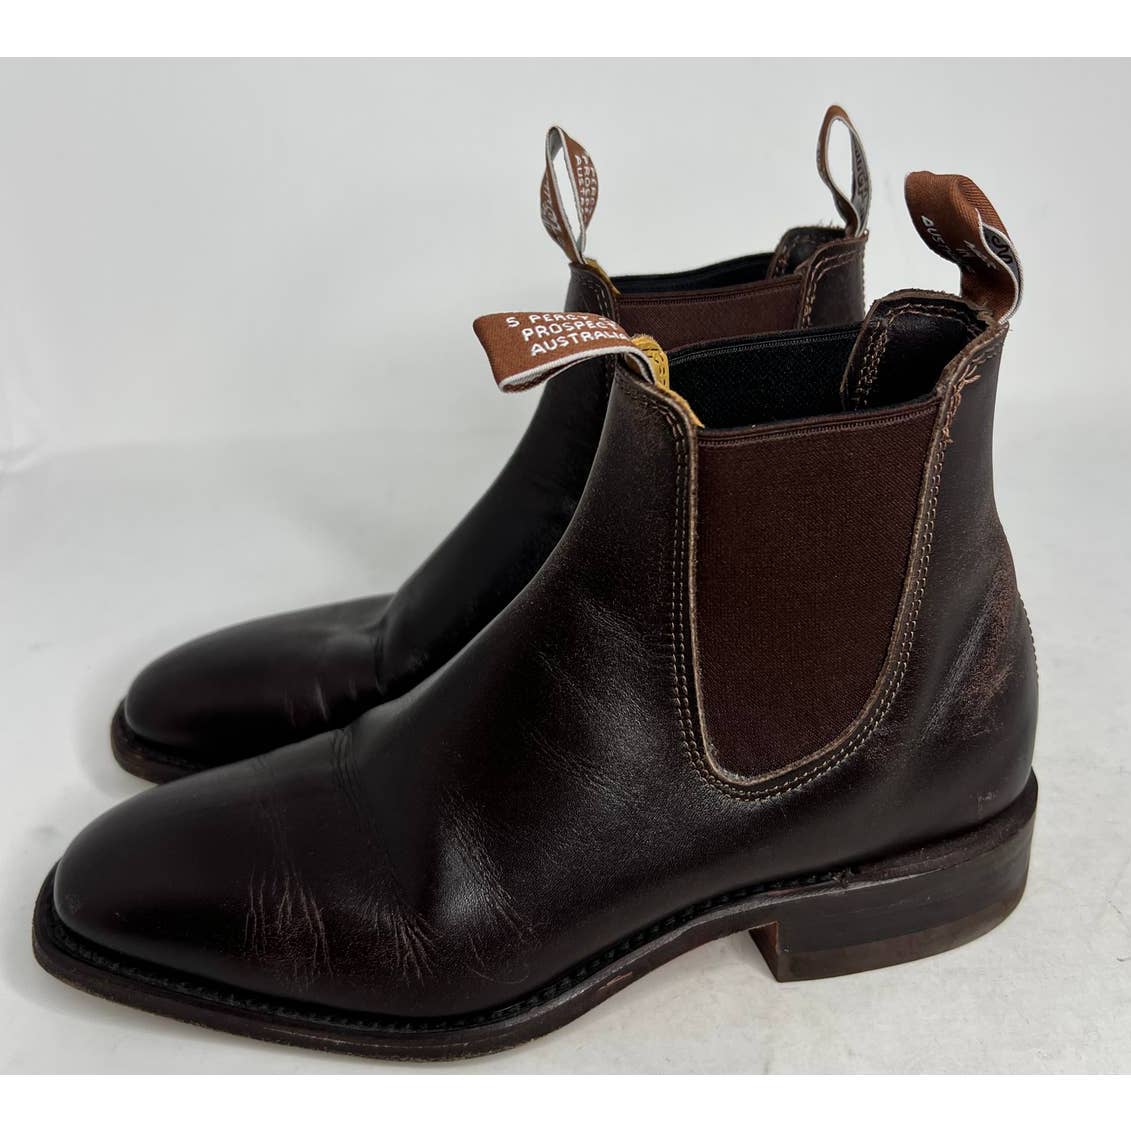 R.M. Williams Brown Leather Chelsea Boots Sz.6